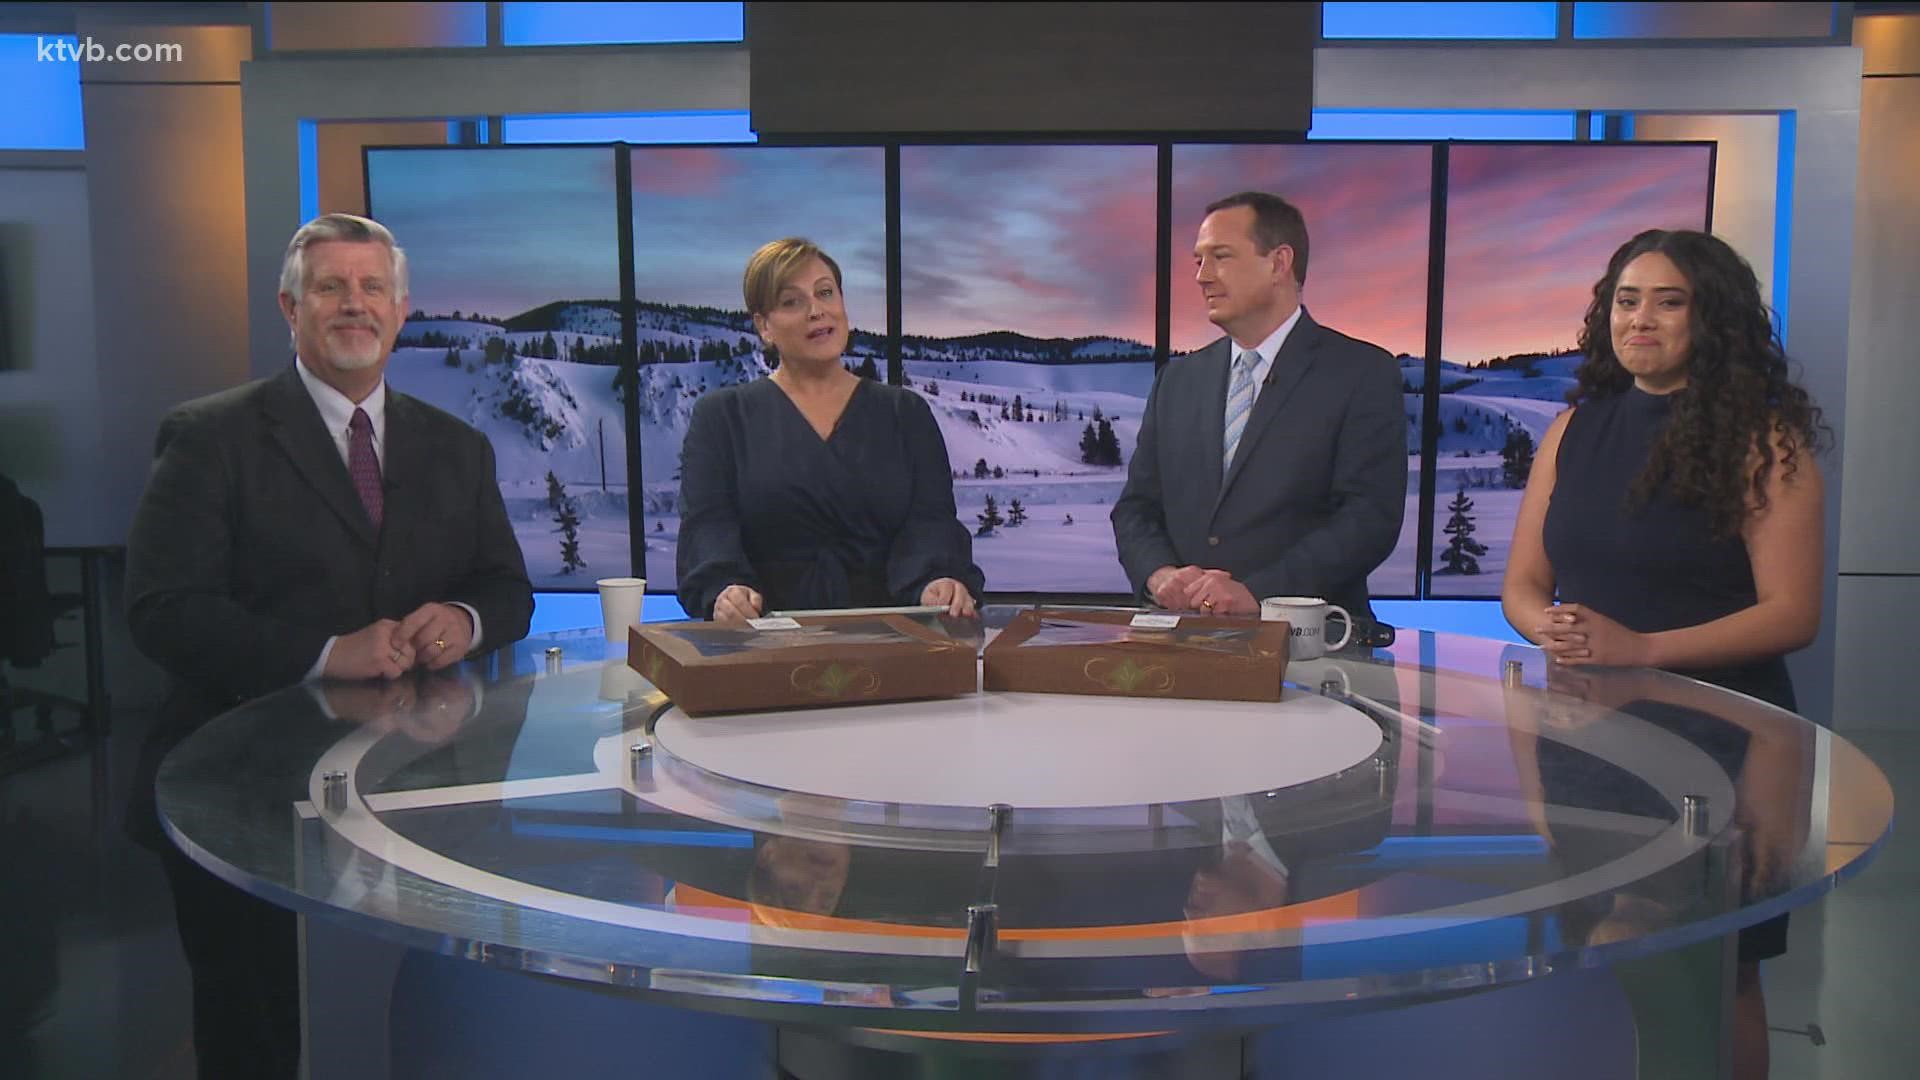 After 14 years of anchoring the morning news on KTVB, Doug Petcash is sliding over to other newscasts later in the day.